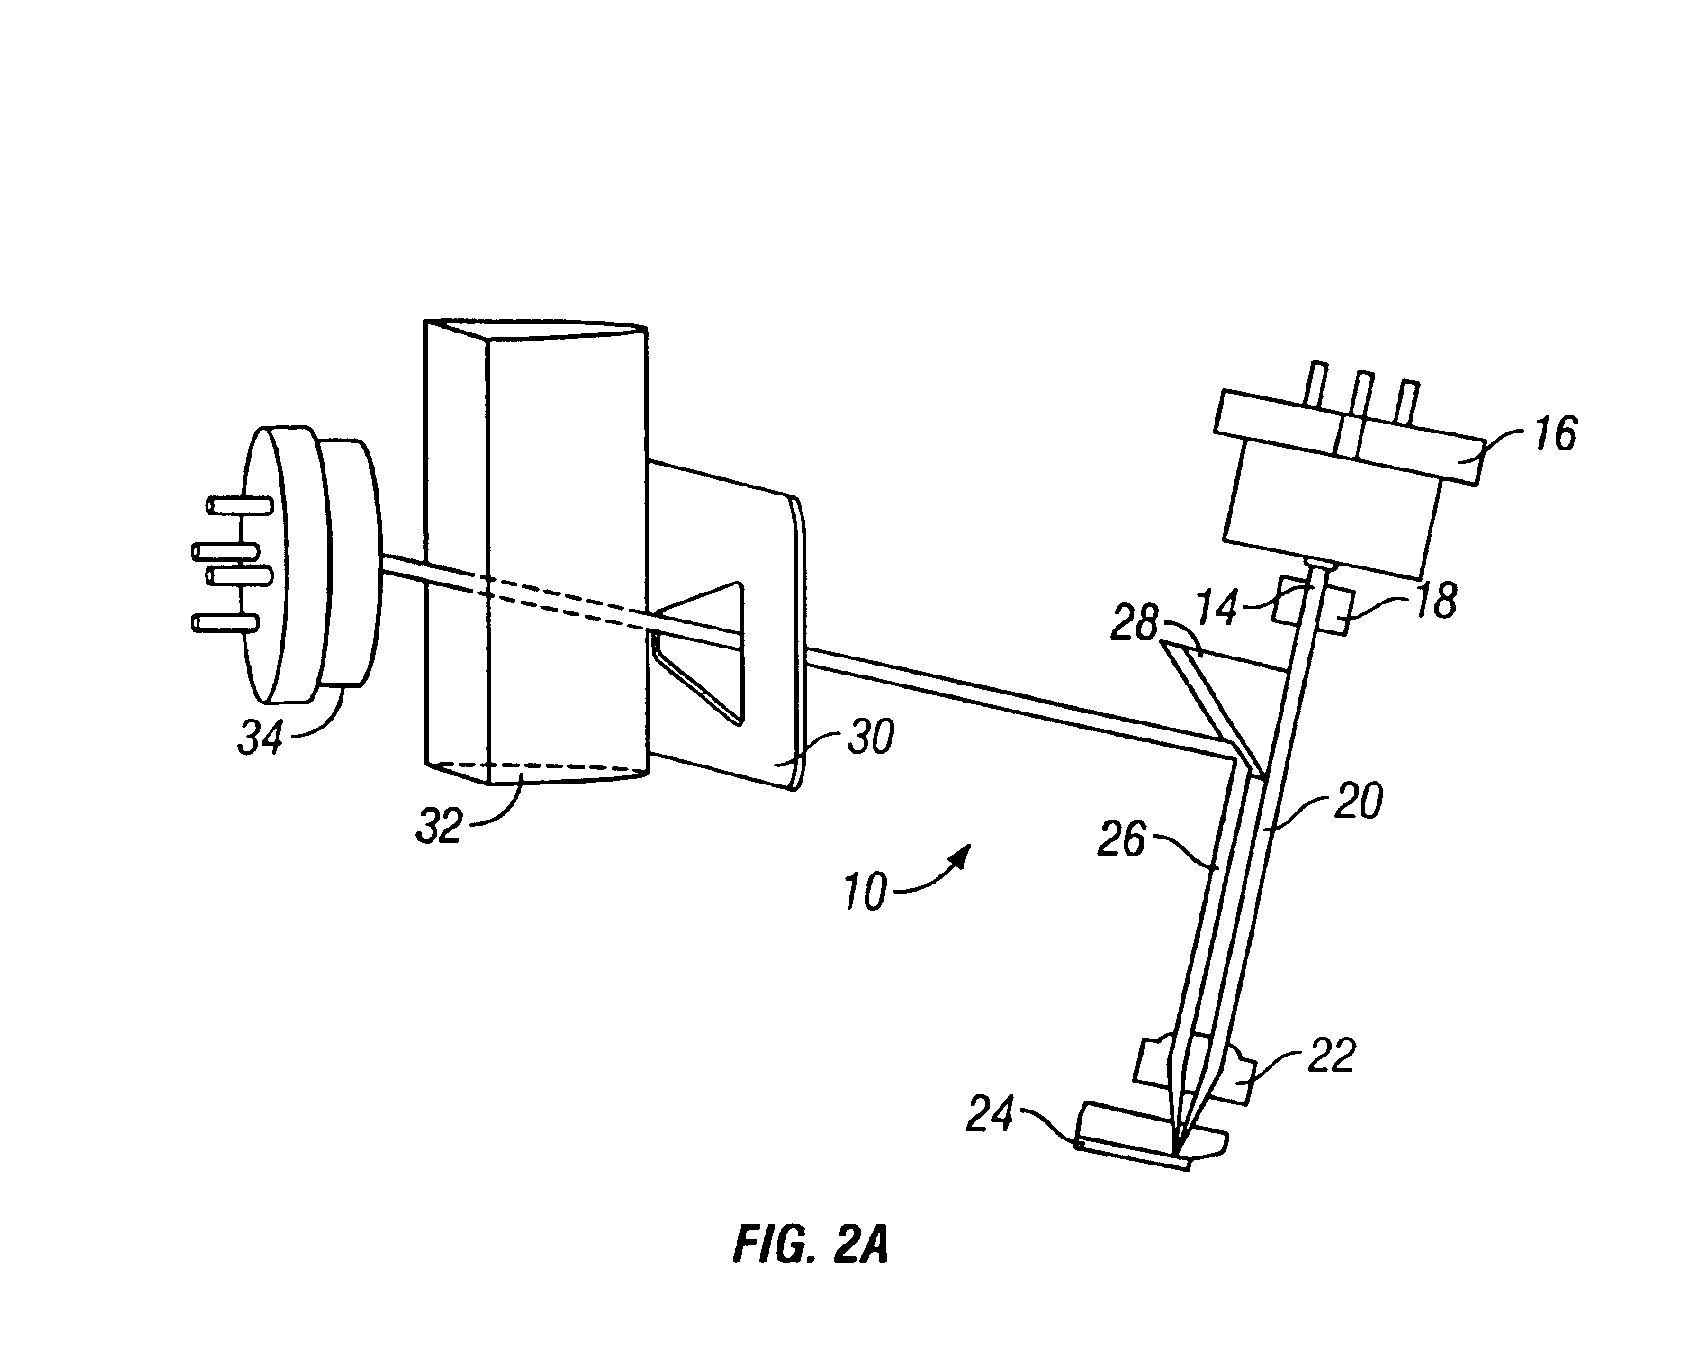 Measurement head for atomic force microscopy and other applications